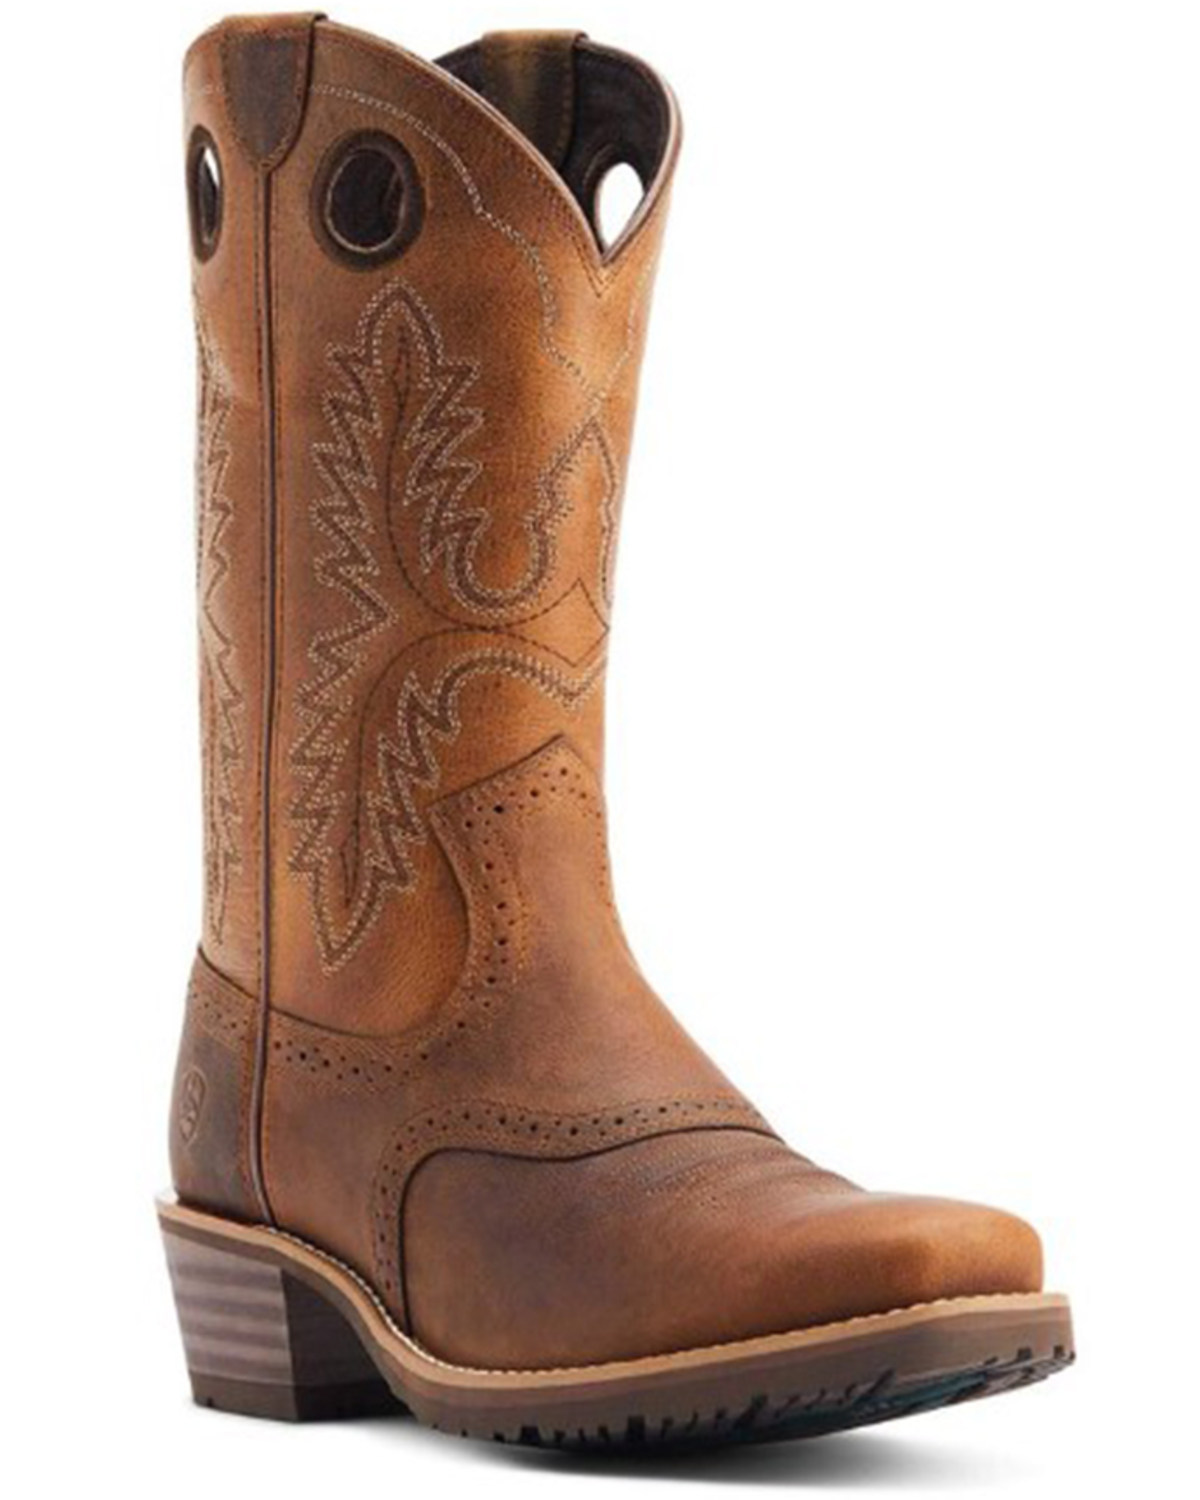 Ariat Men's Hybrid Roughstock Western Performance Boots - Square Toe